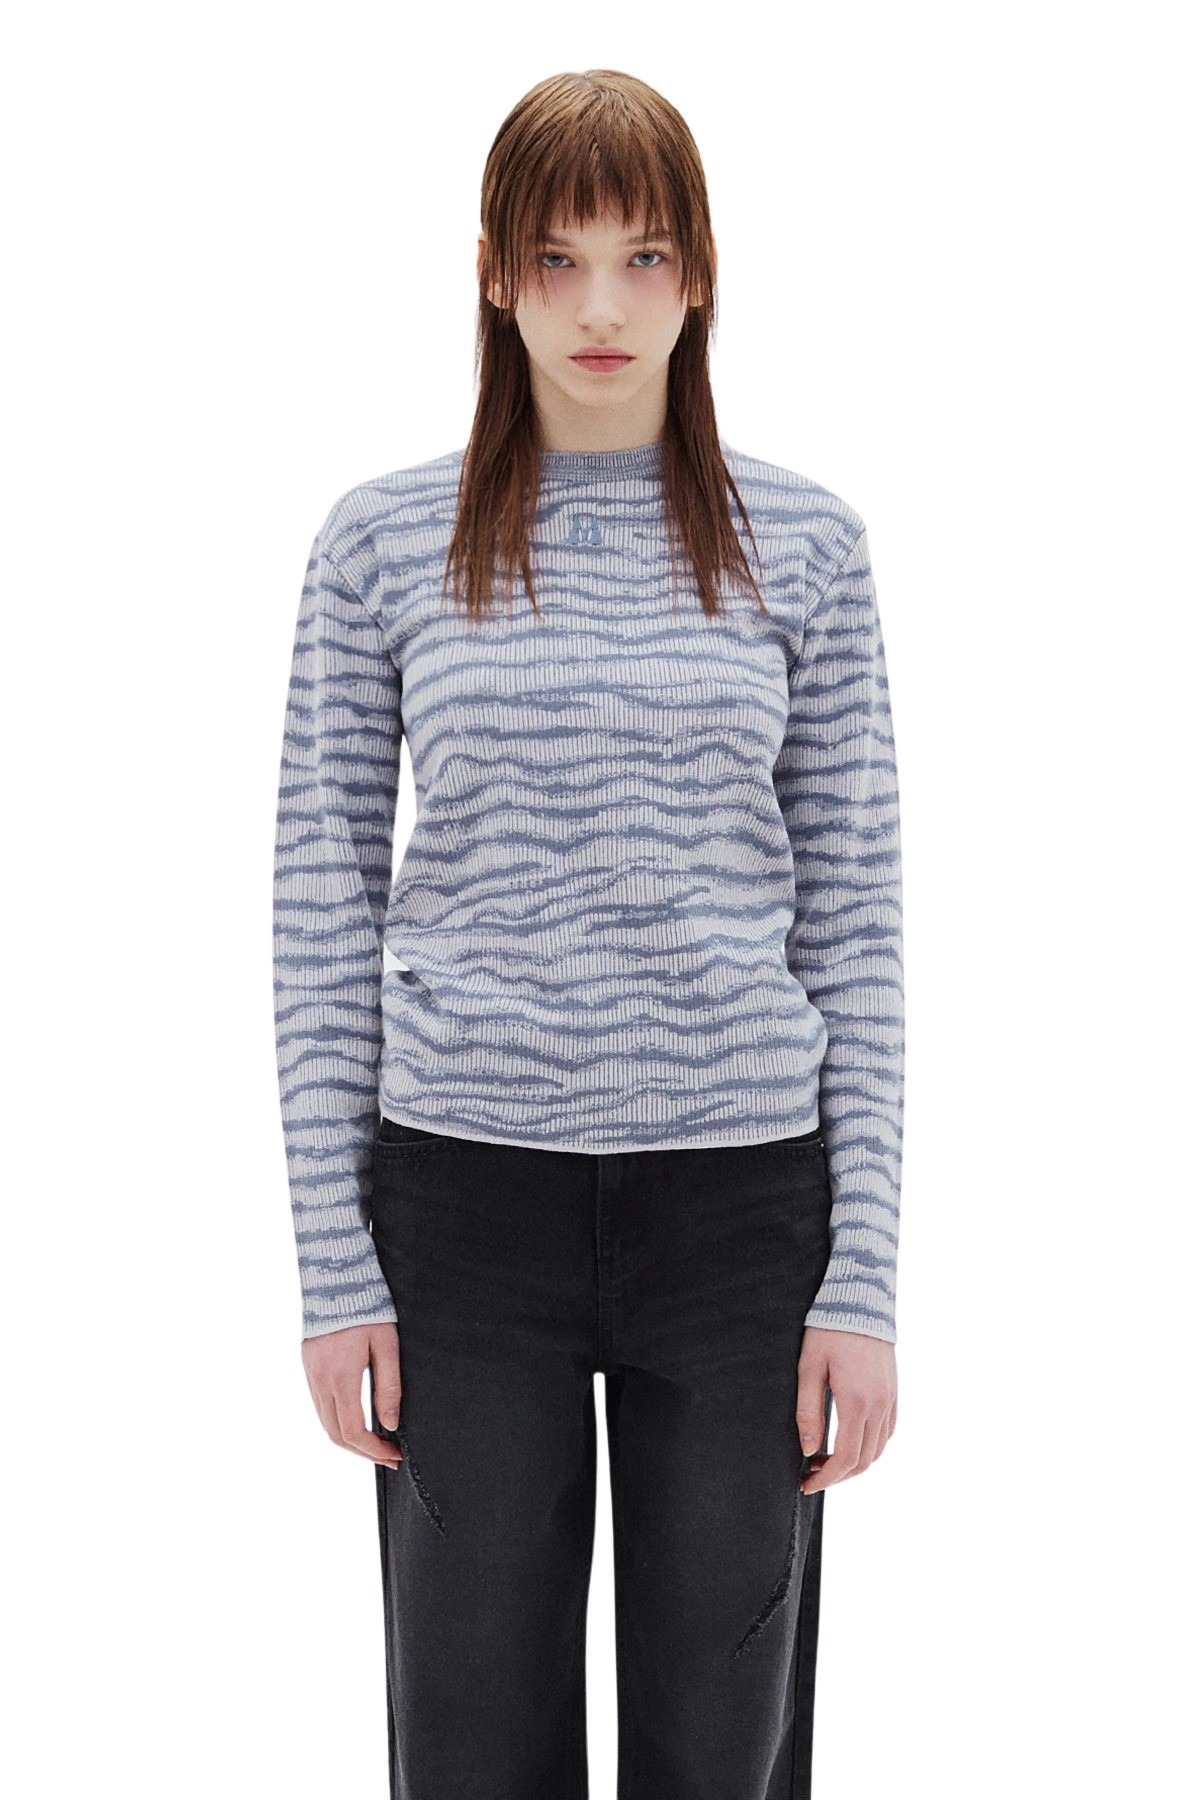 GRADATION WAVE KNIT TOP IN BLUE